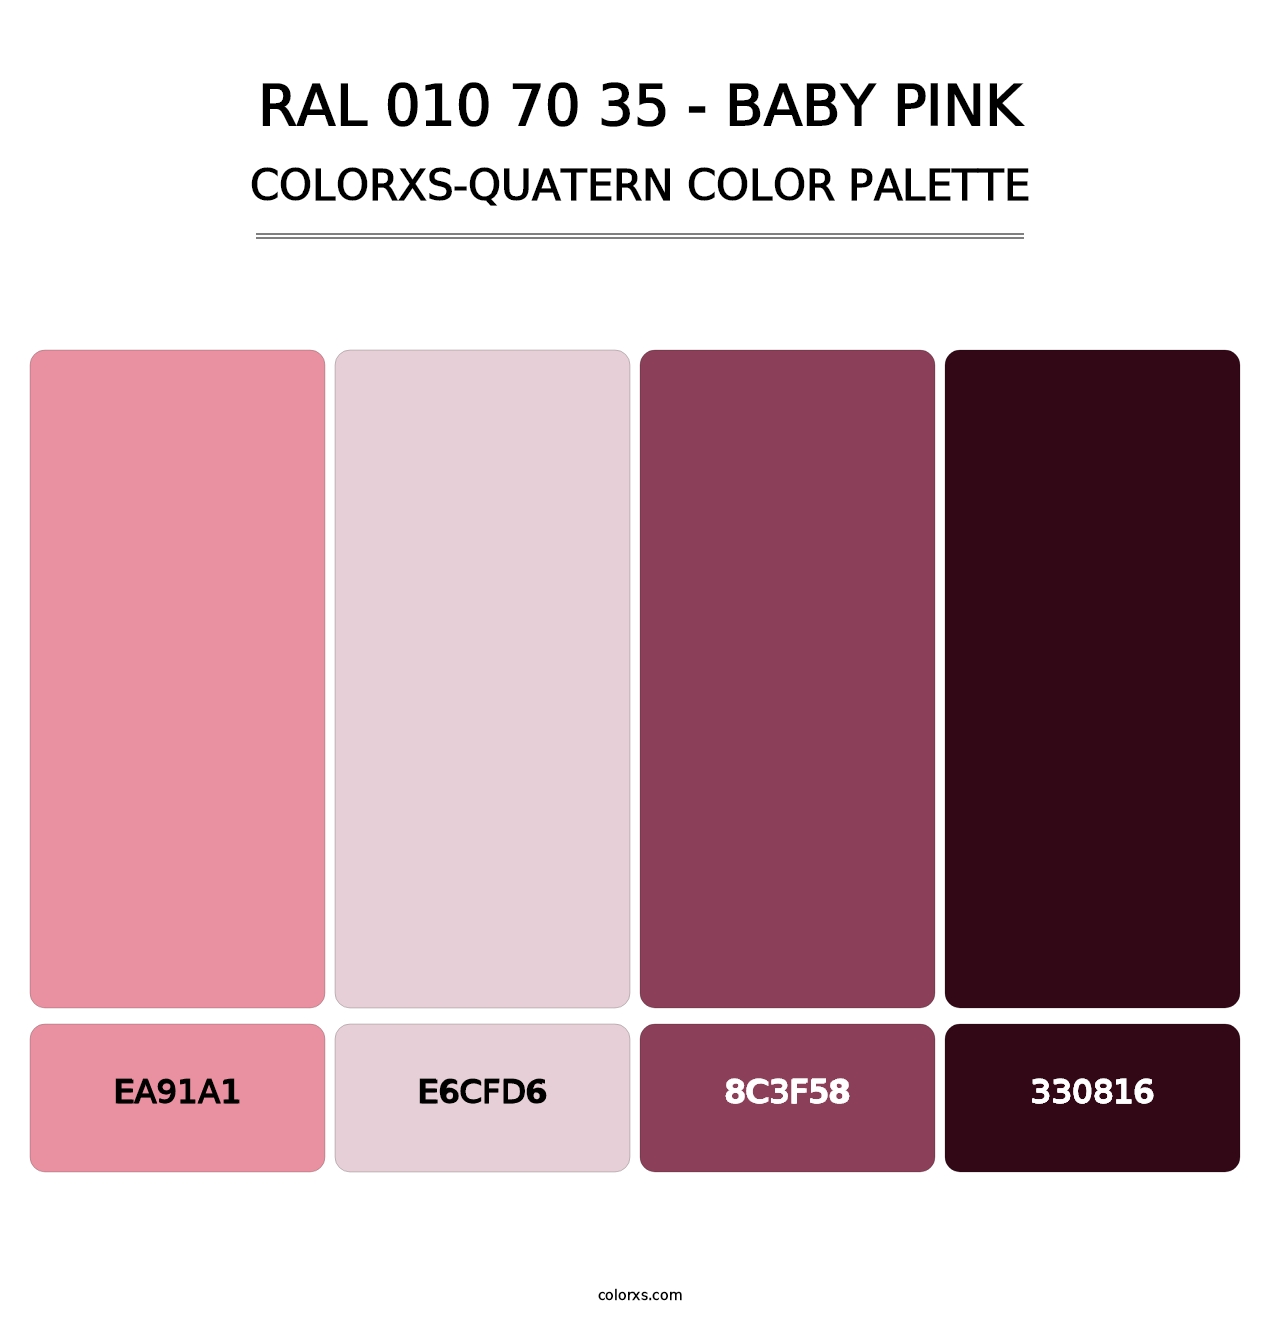 RAL 010 70 35 - Baby Pink - Colorxs Quatern Palette